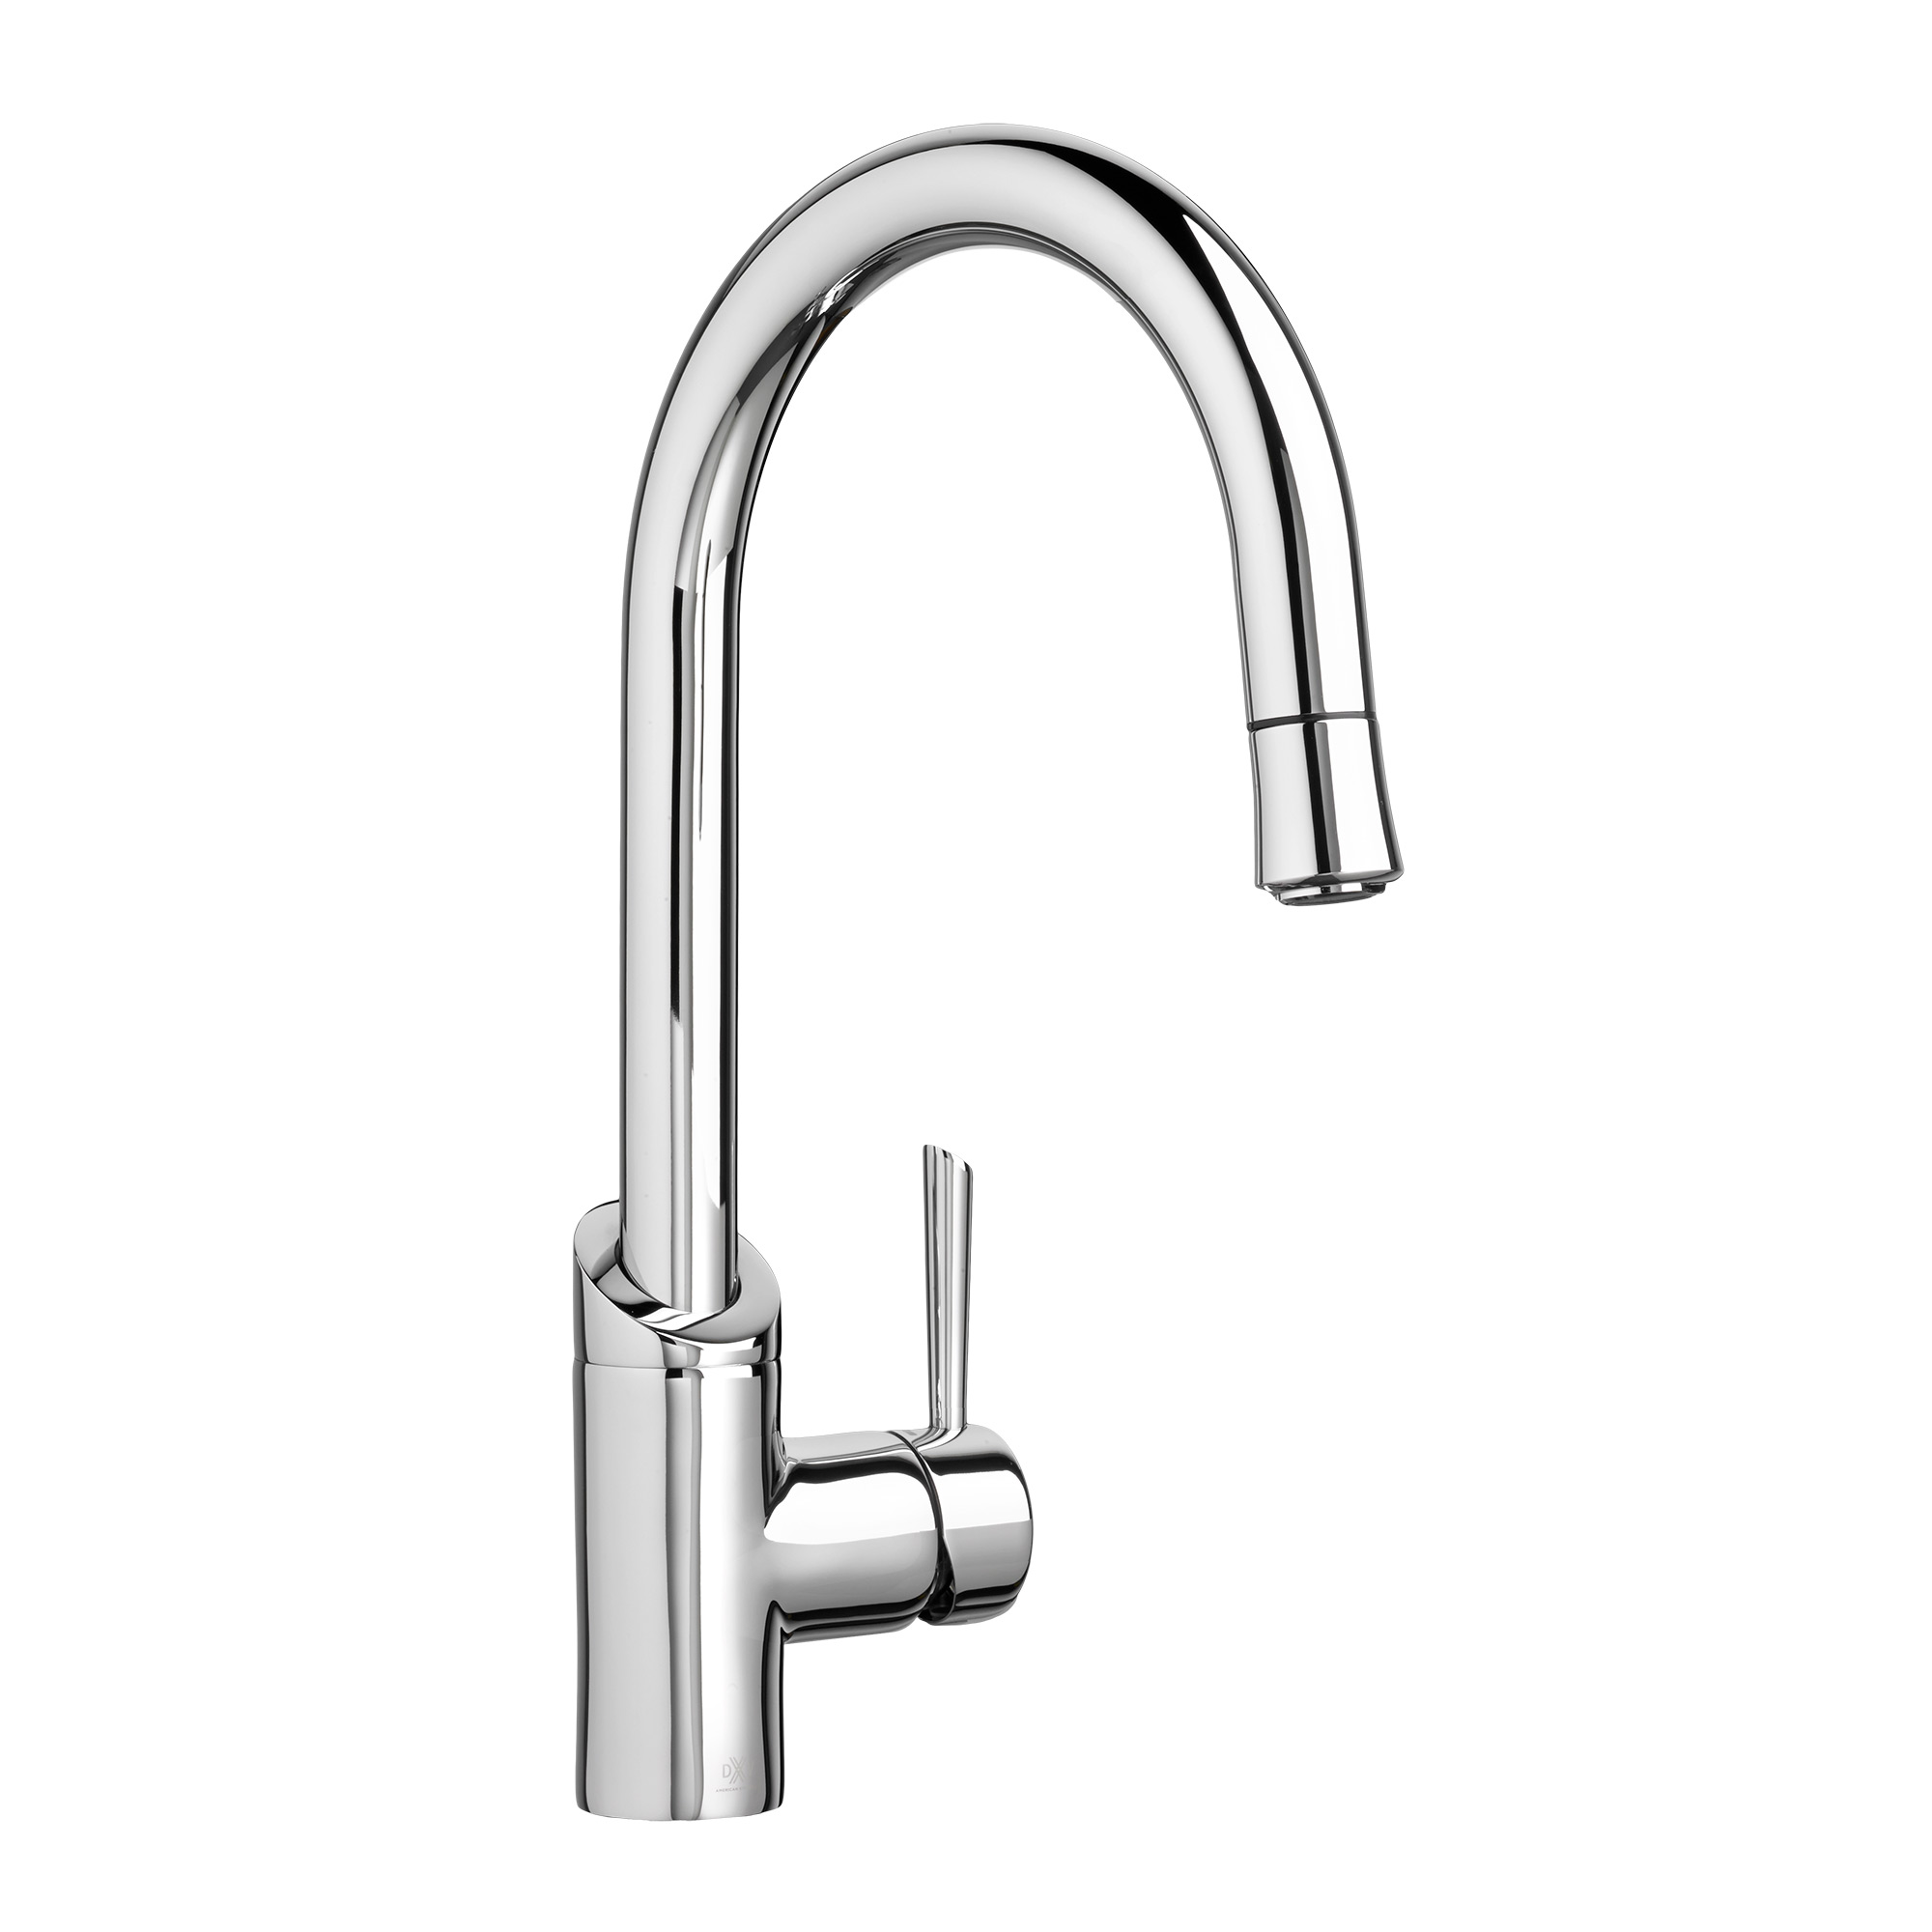 Fresno® Single Handle Kitchen Faucet with Lever Handle